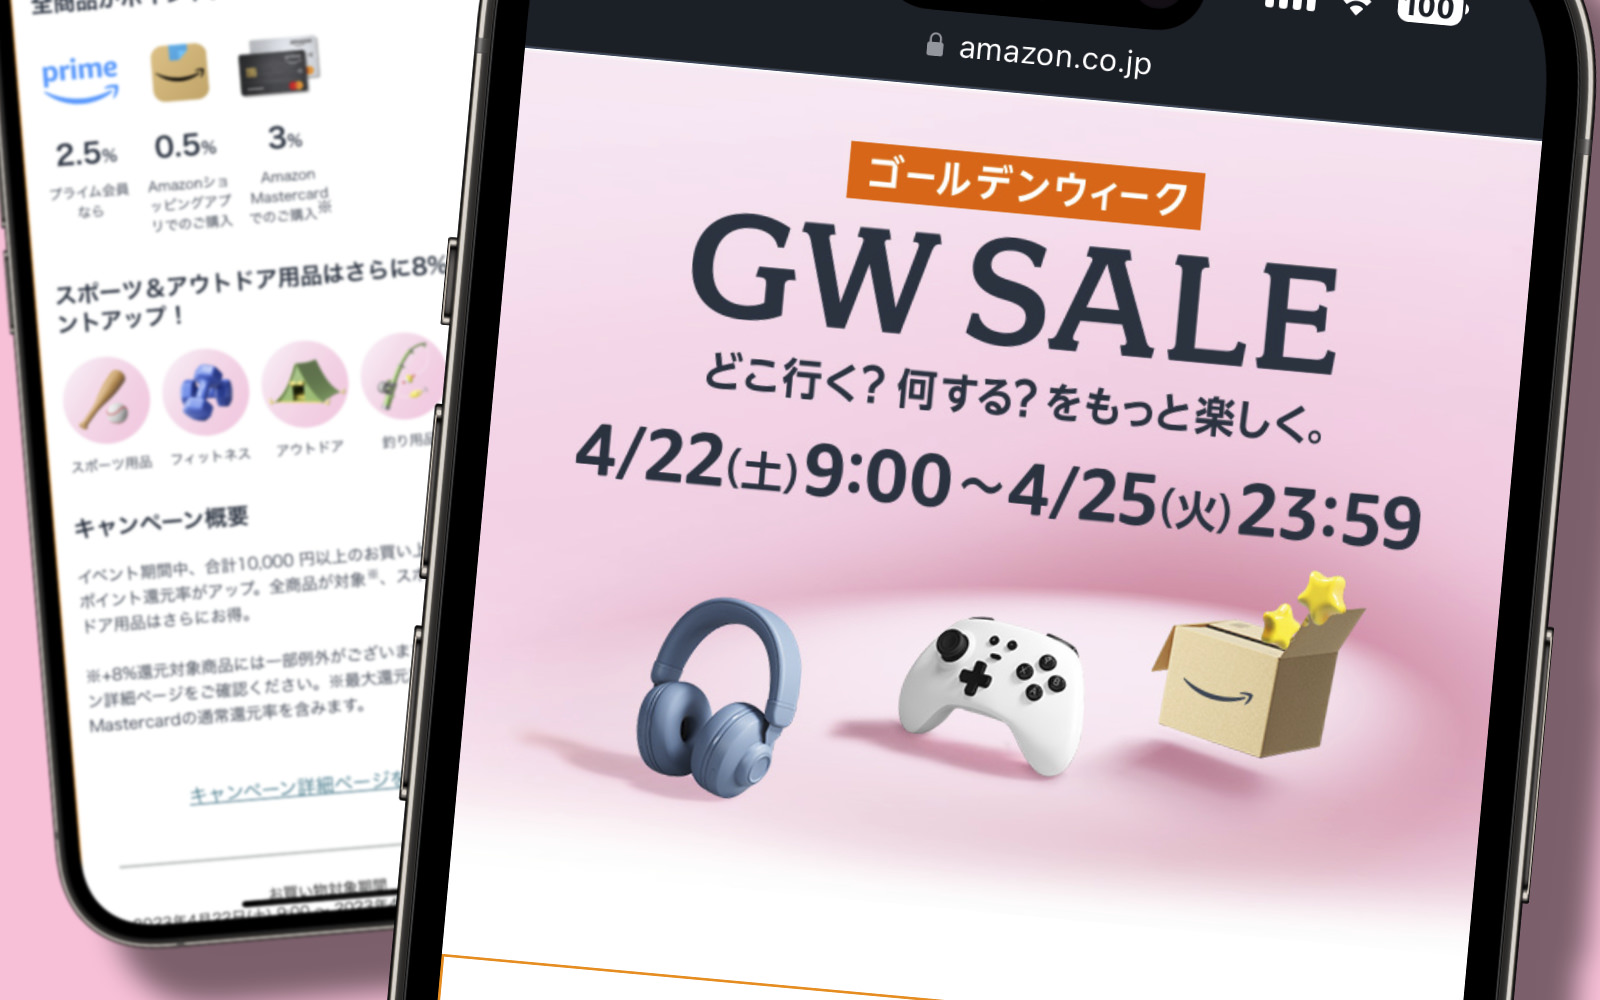 Amazon GW Sale coming this year